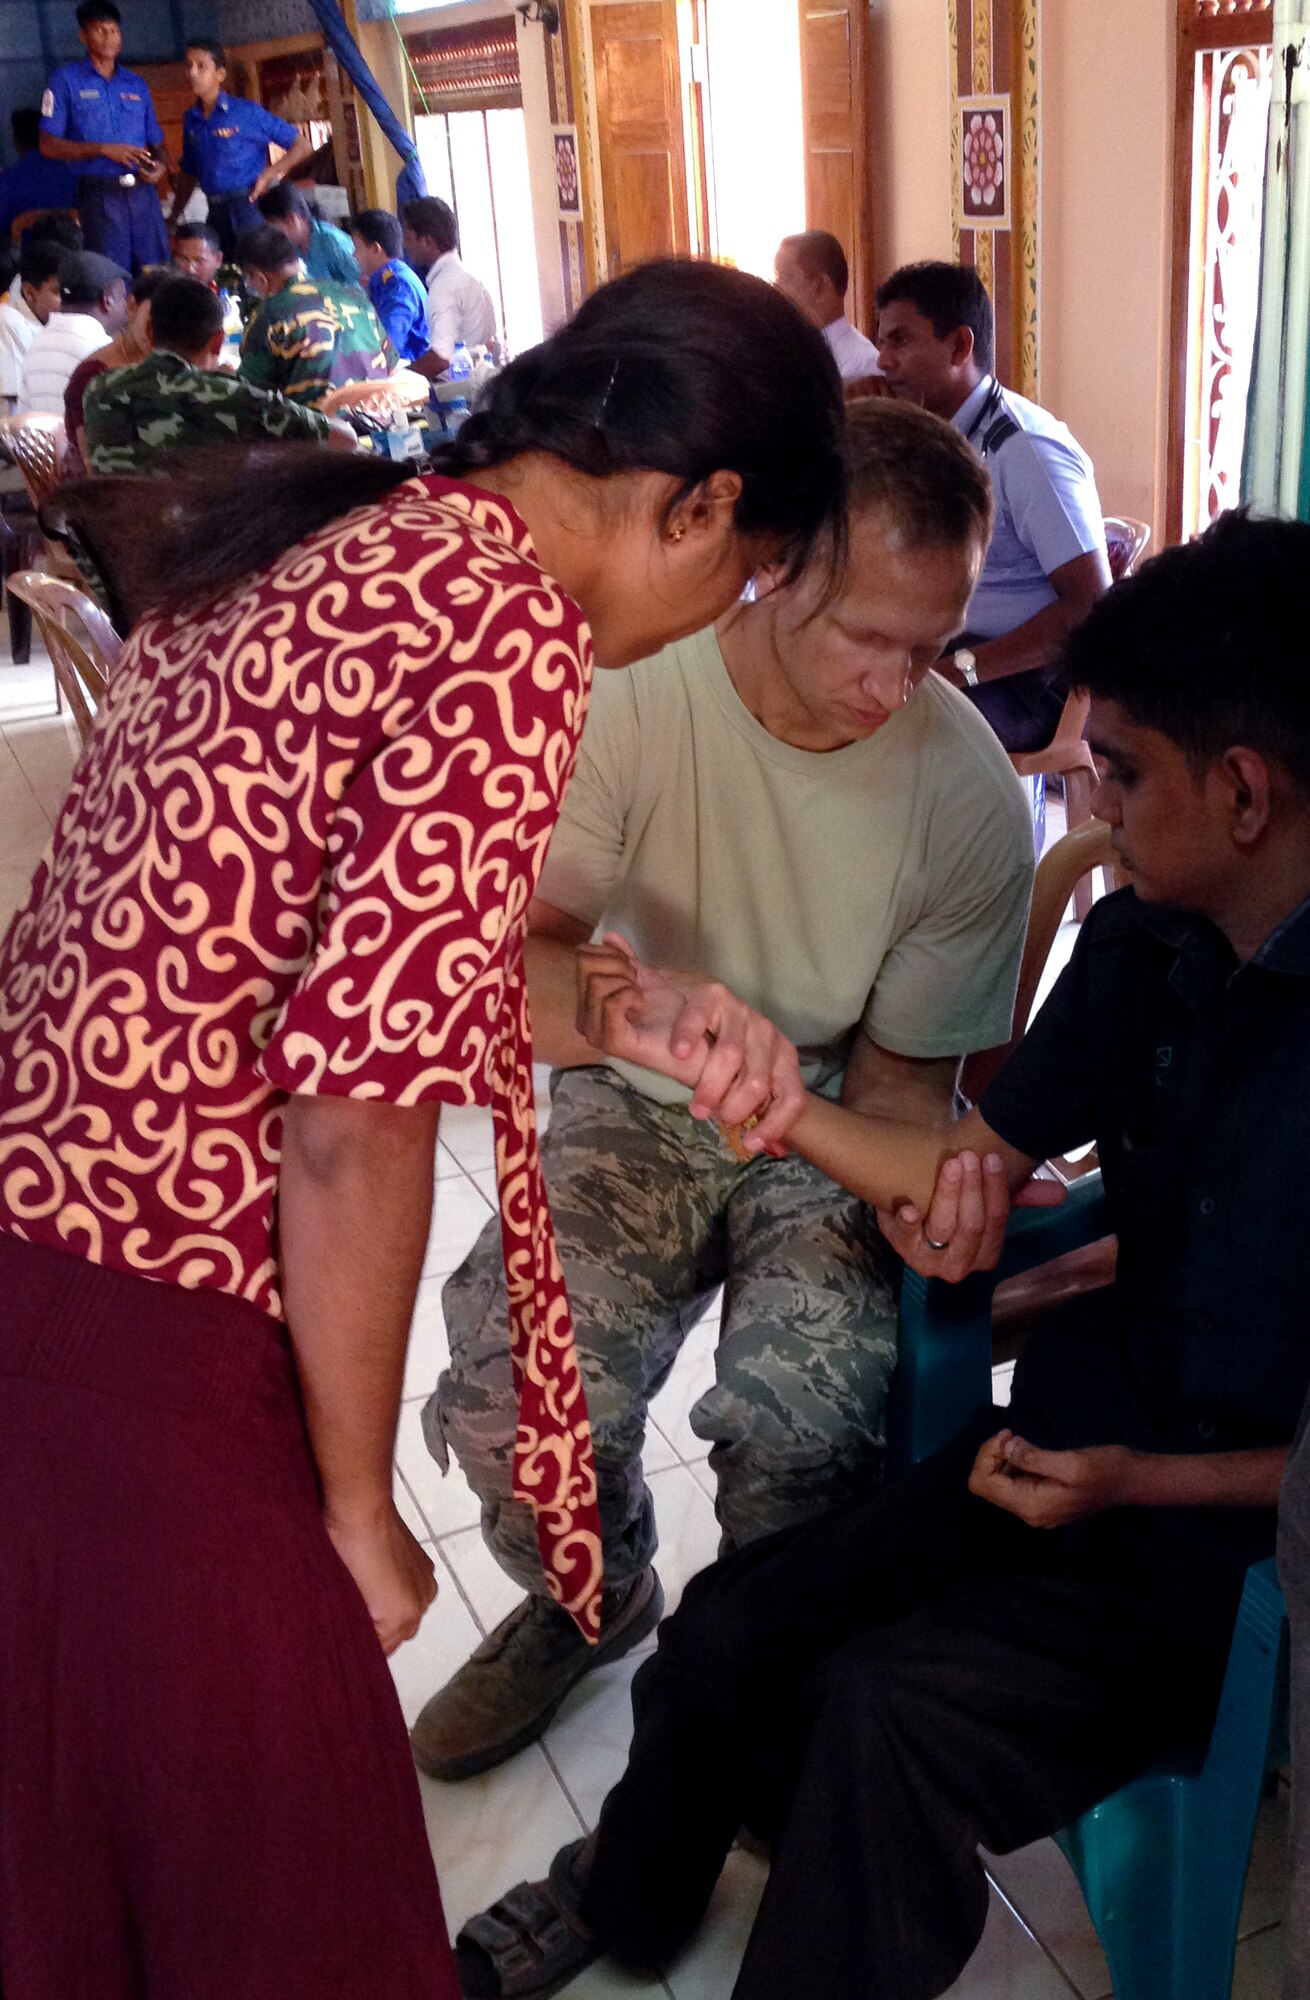 Air Force Maj. Eric Stephan examines a patient during the Pacific Angel Mission with the assistance of translator in the Jaffna Peninsula of Sri Lanka, July 28- Aug.18. (Photo courtesy of Tech. Sgt. Misty Ray, 142nd Fighter Wing Medical Group).